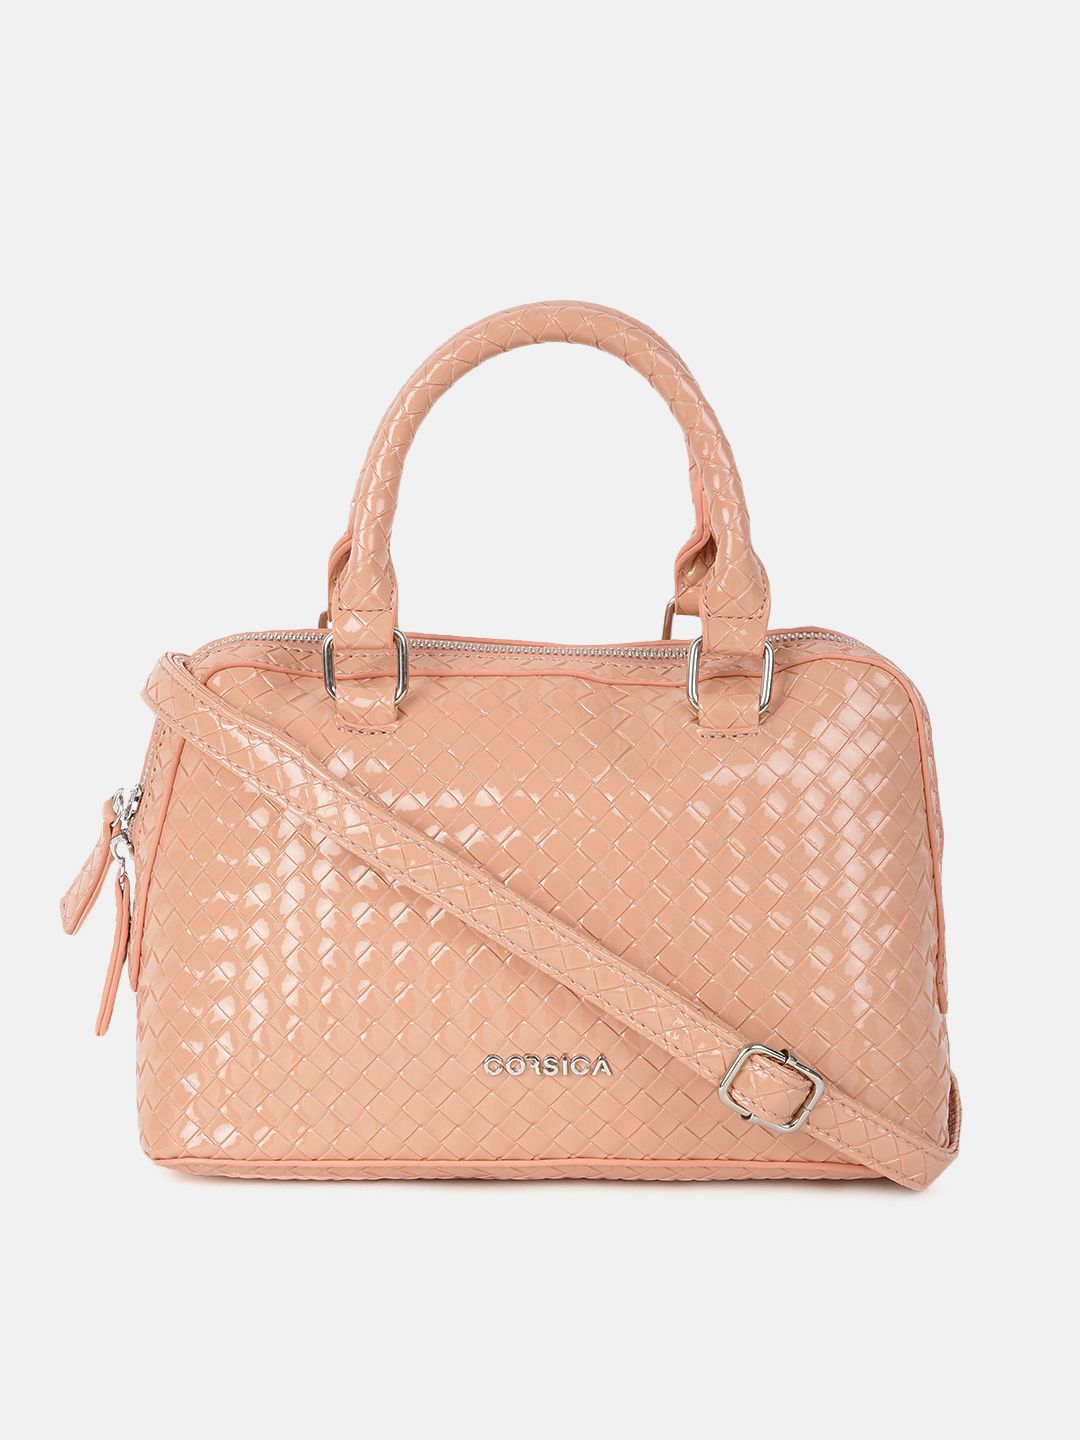 CORSICA Pink Textured Structured Sling Bag Price in India